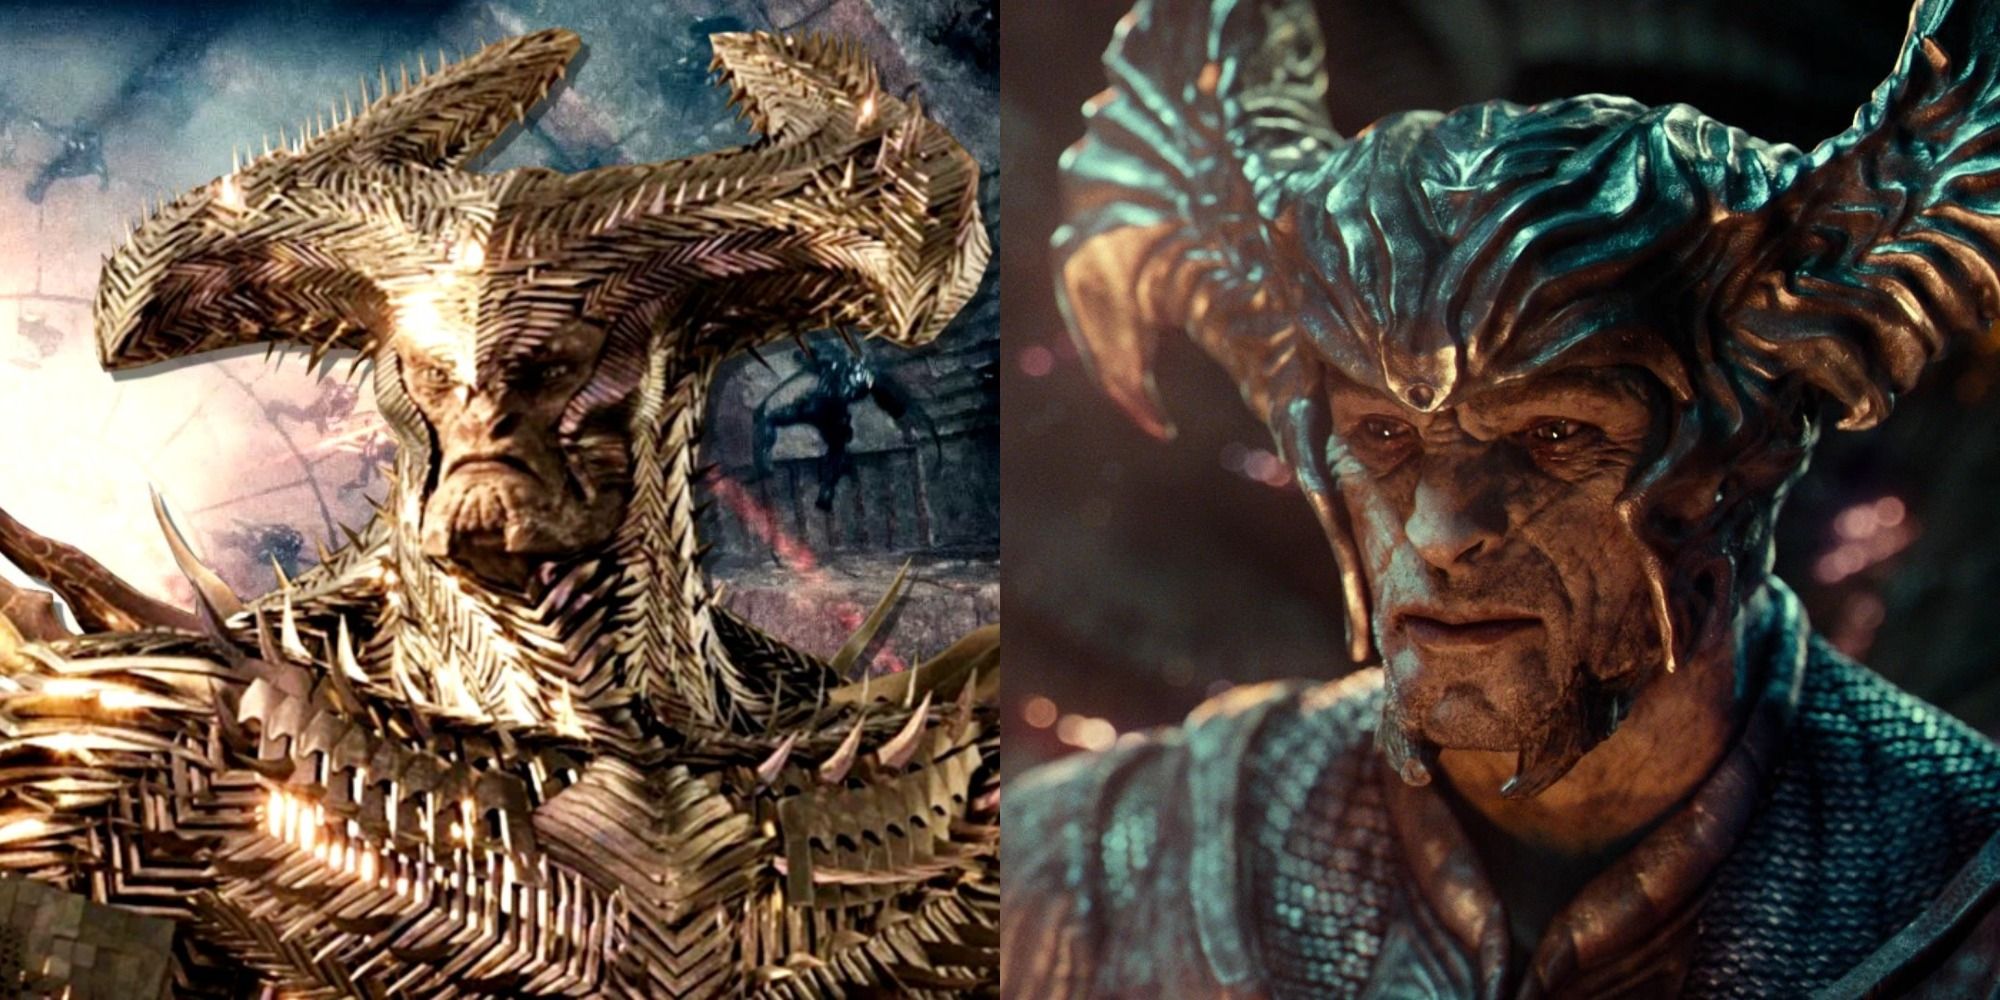 A featured image of Steppenwolf in Snyder's cut and Whedon's version